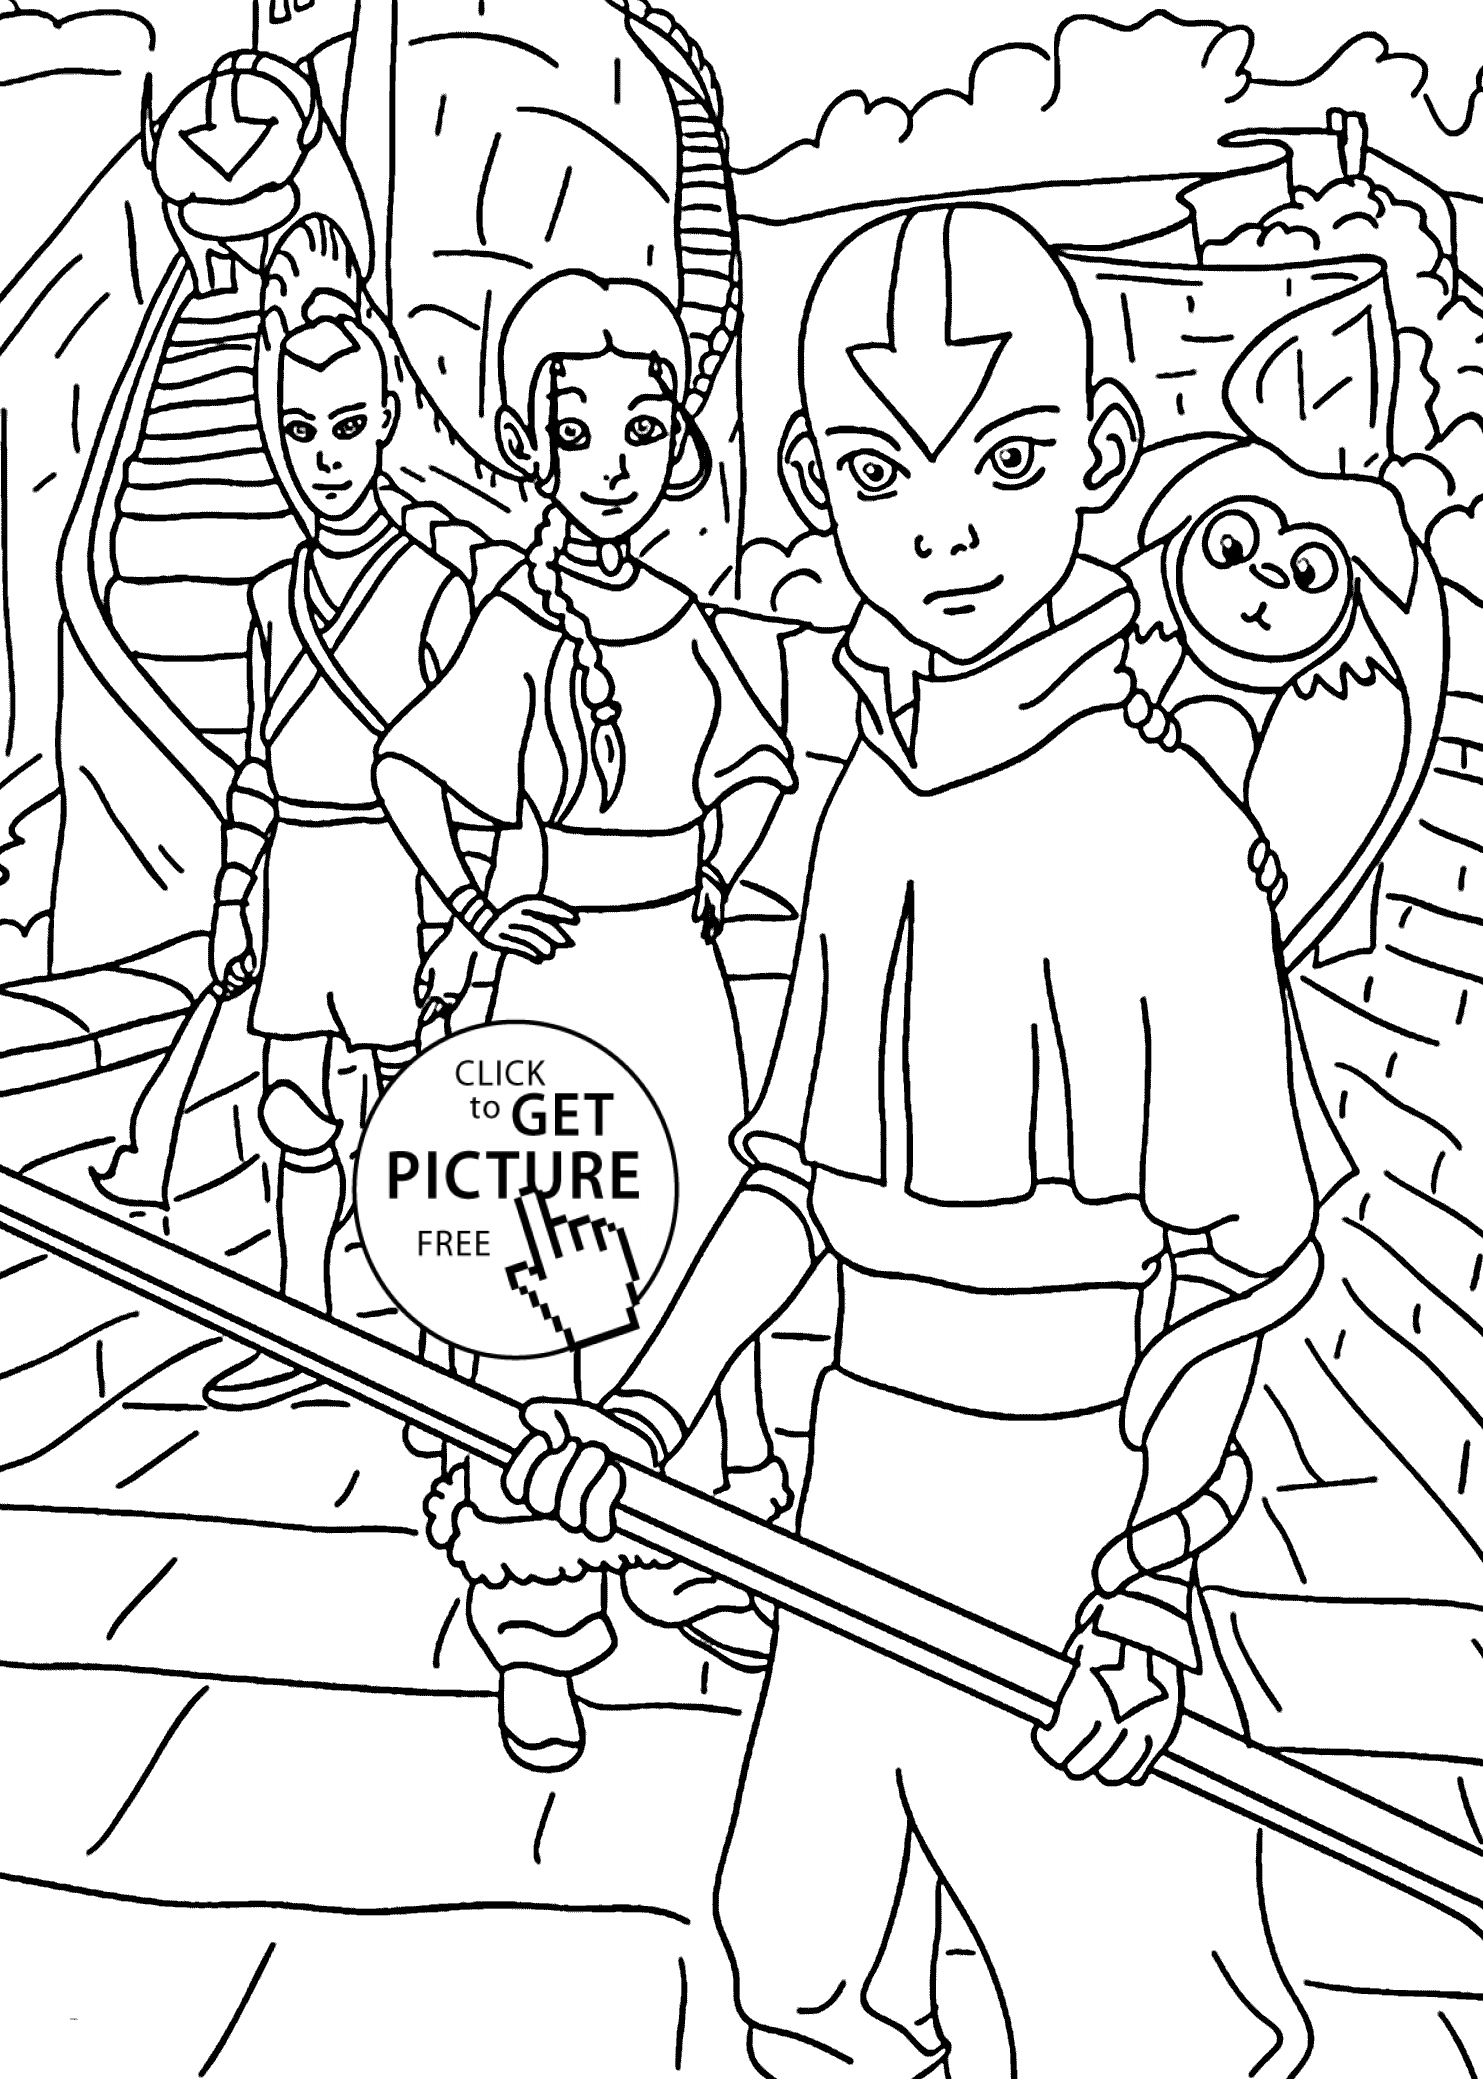 Avatars from The Legend of Korra coloring pages for kids ...